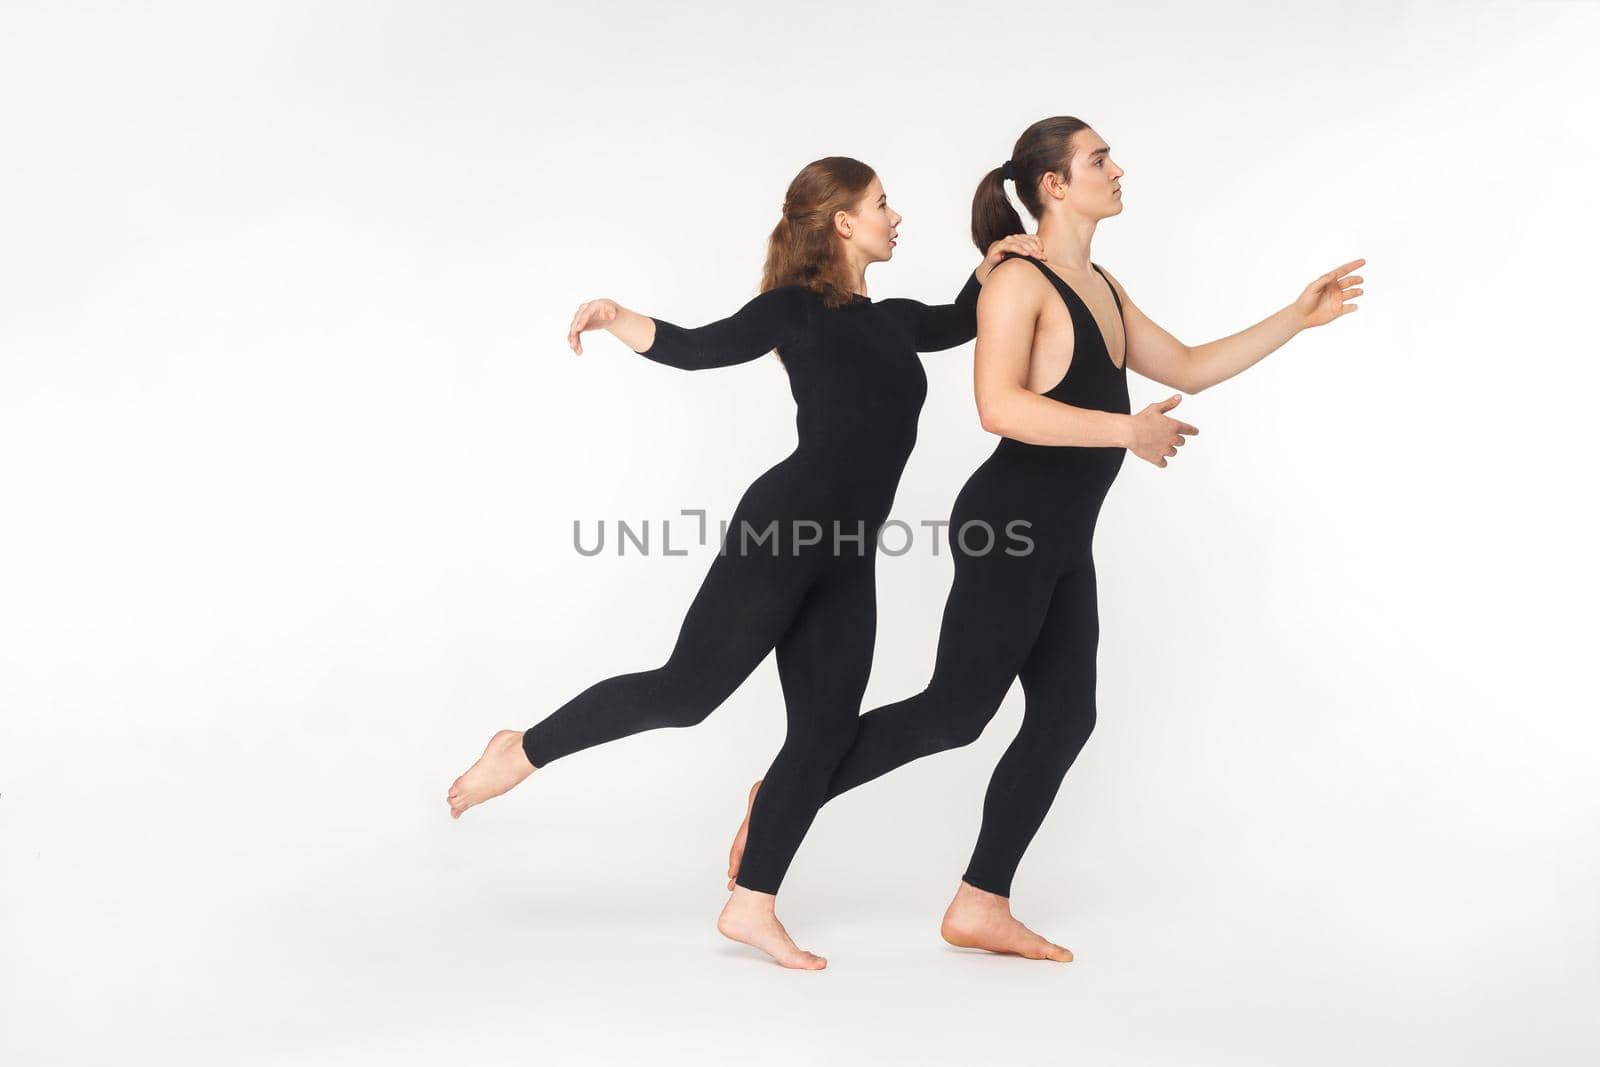 Pantomime concept. Two artist standing on toe and balancing. Studio shot, isolated on white background